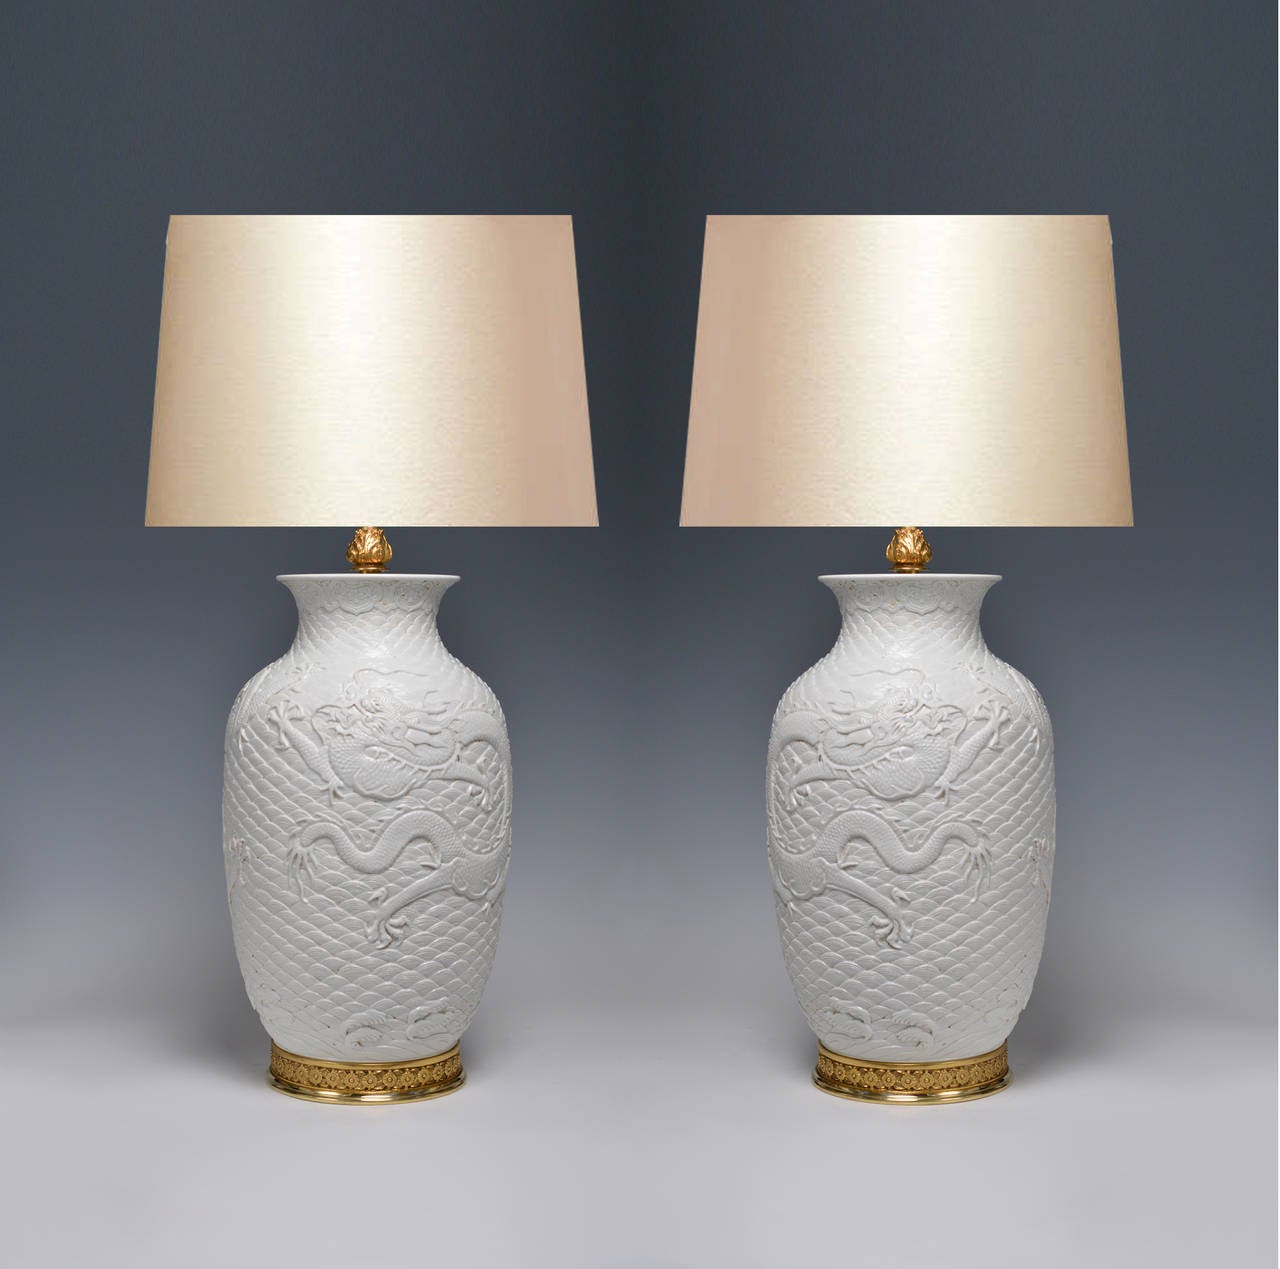 Pair of white porcelain lamps with gilt bases, with dragon decoration; 19.5